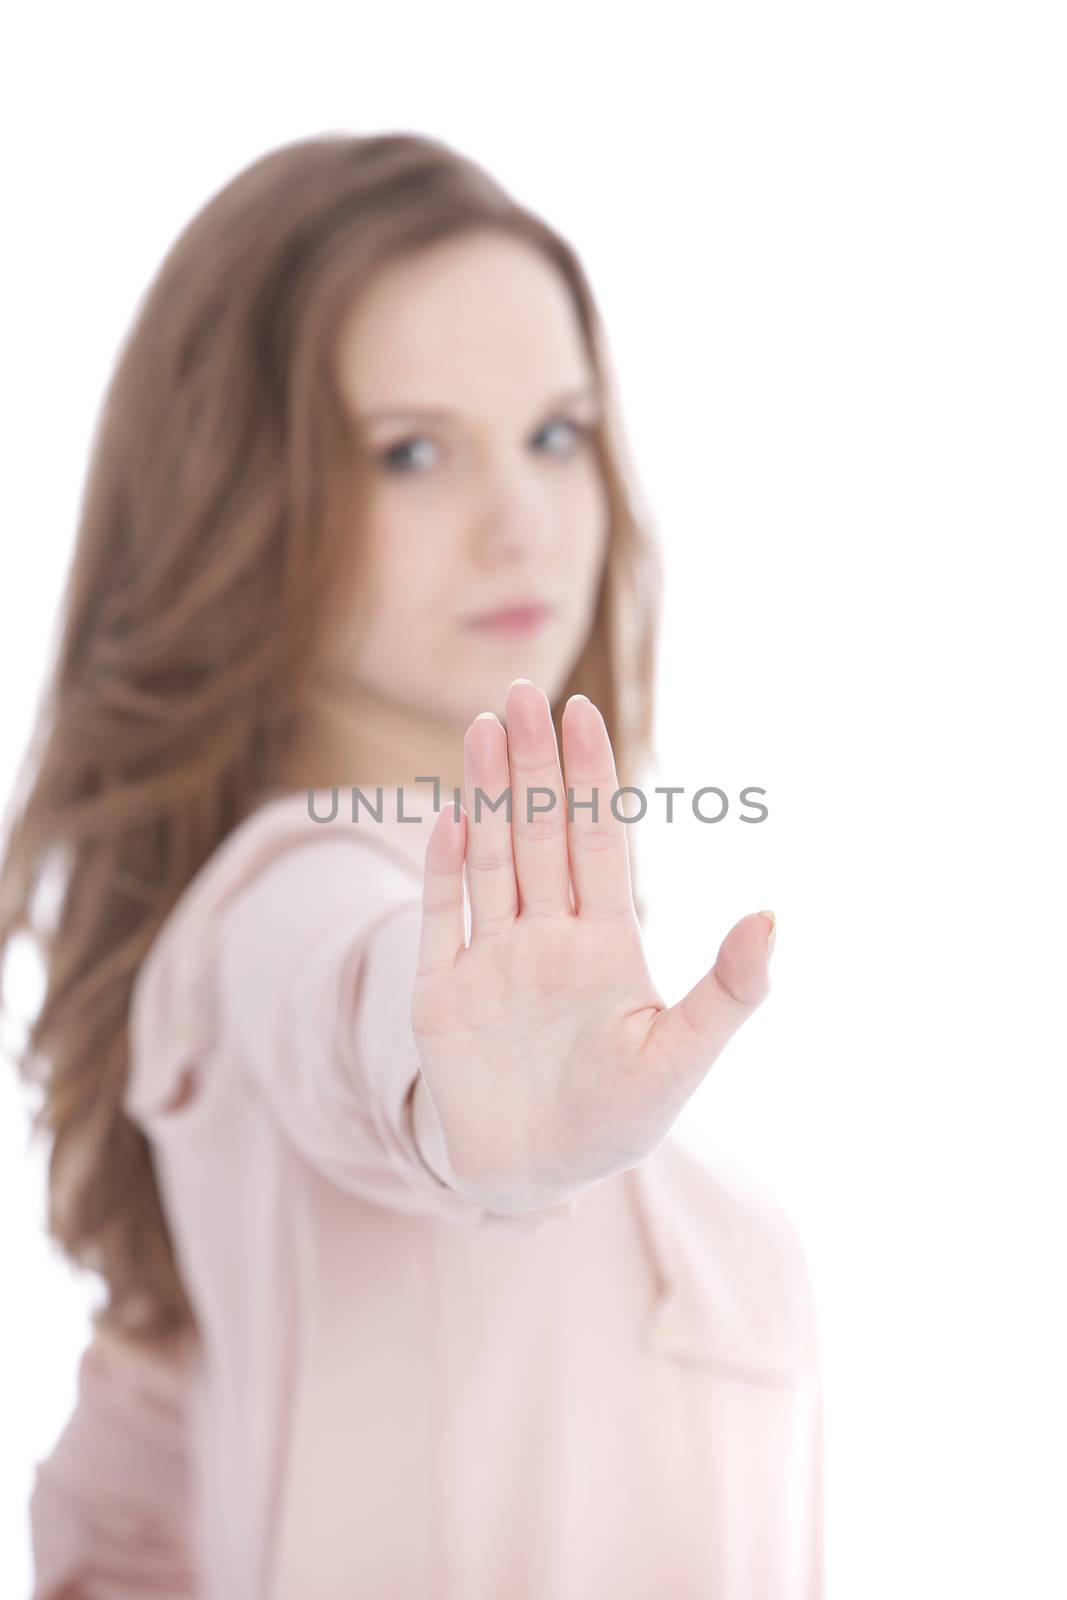 Young woman with a stern expression giving a Stop gesture with her hand holding up the palm facing the camera to indicate she has had enough